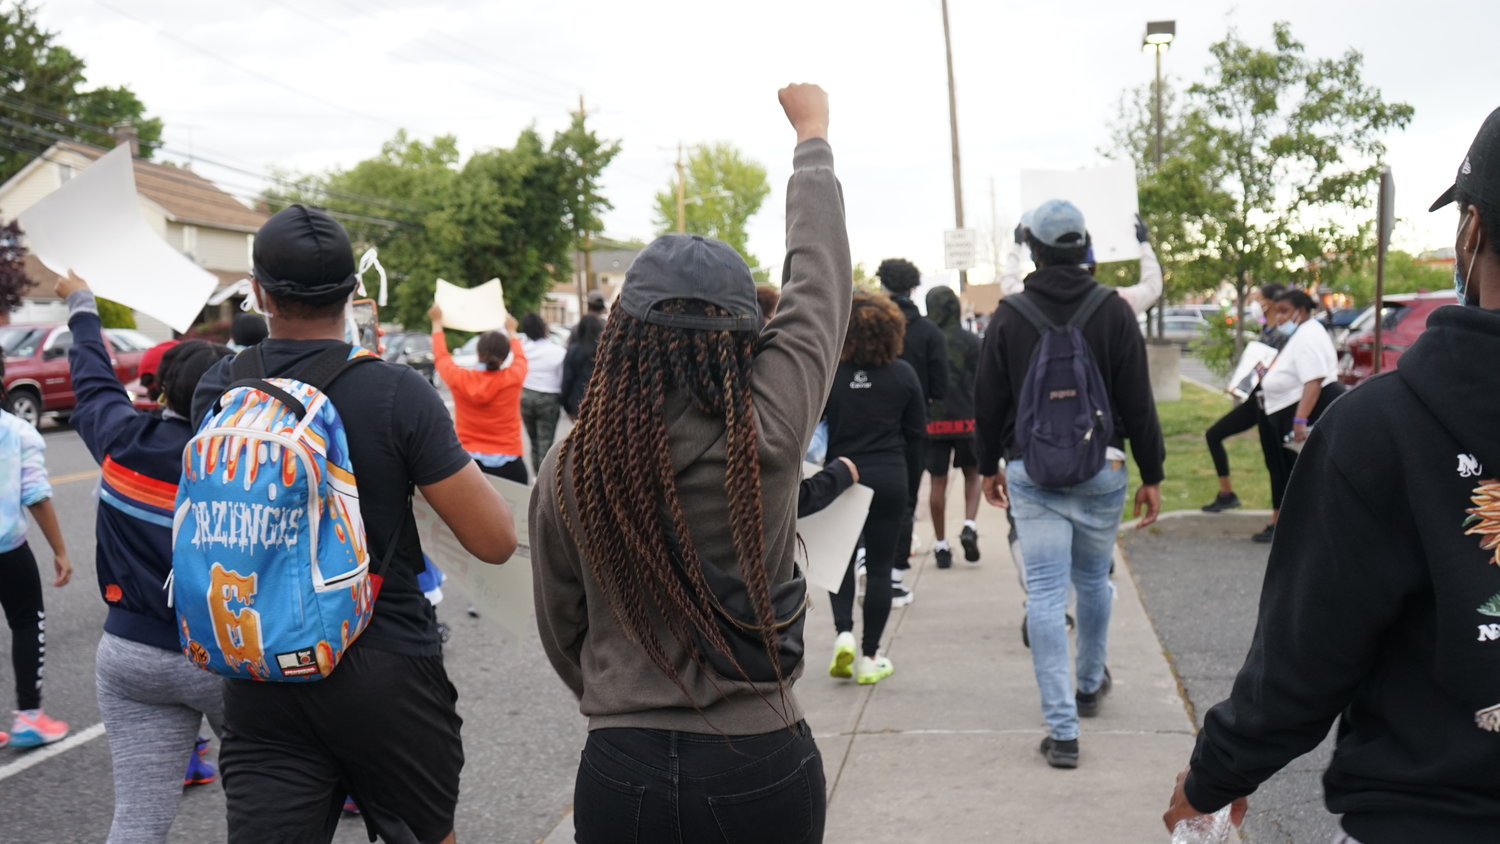 The protestors marched from the corner of Dutch Broadway and Elmont Road to Valley Stream State Park.